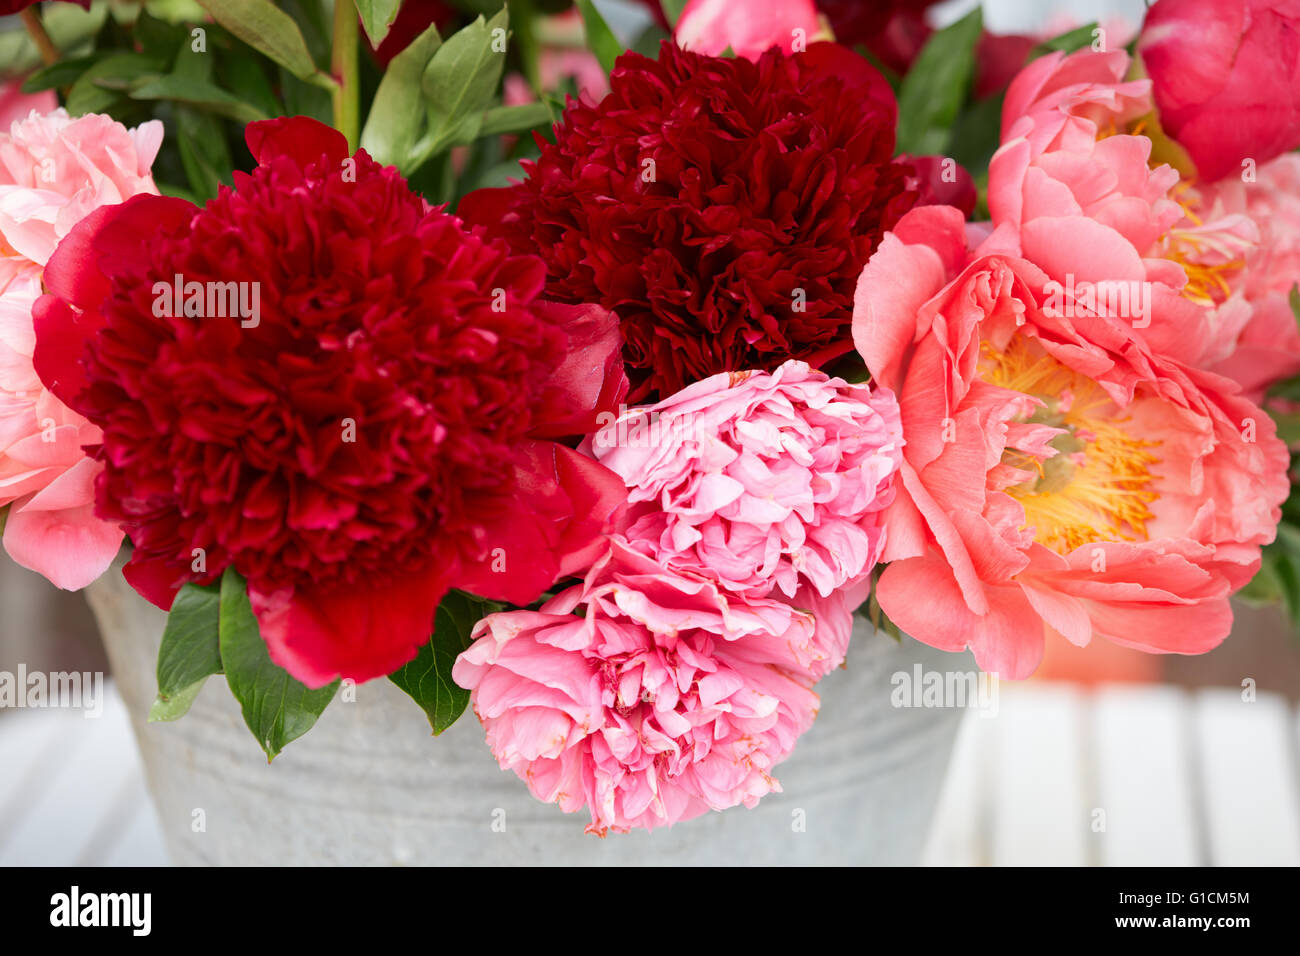 Peony flowers bunch in red and pink colors Stock Photo